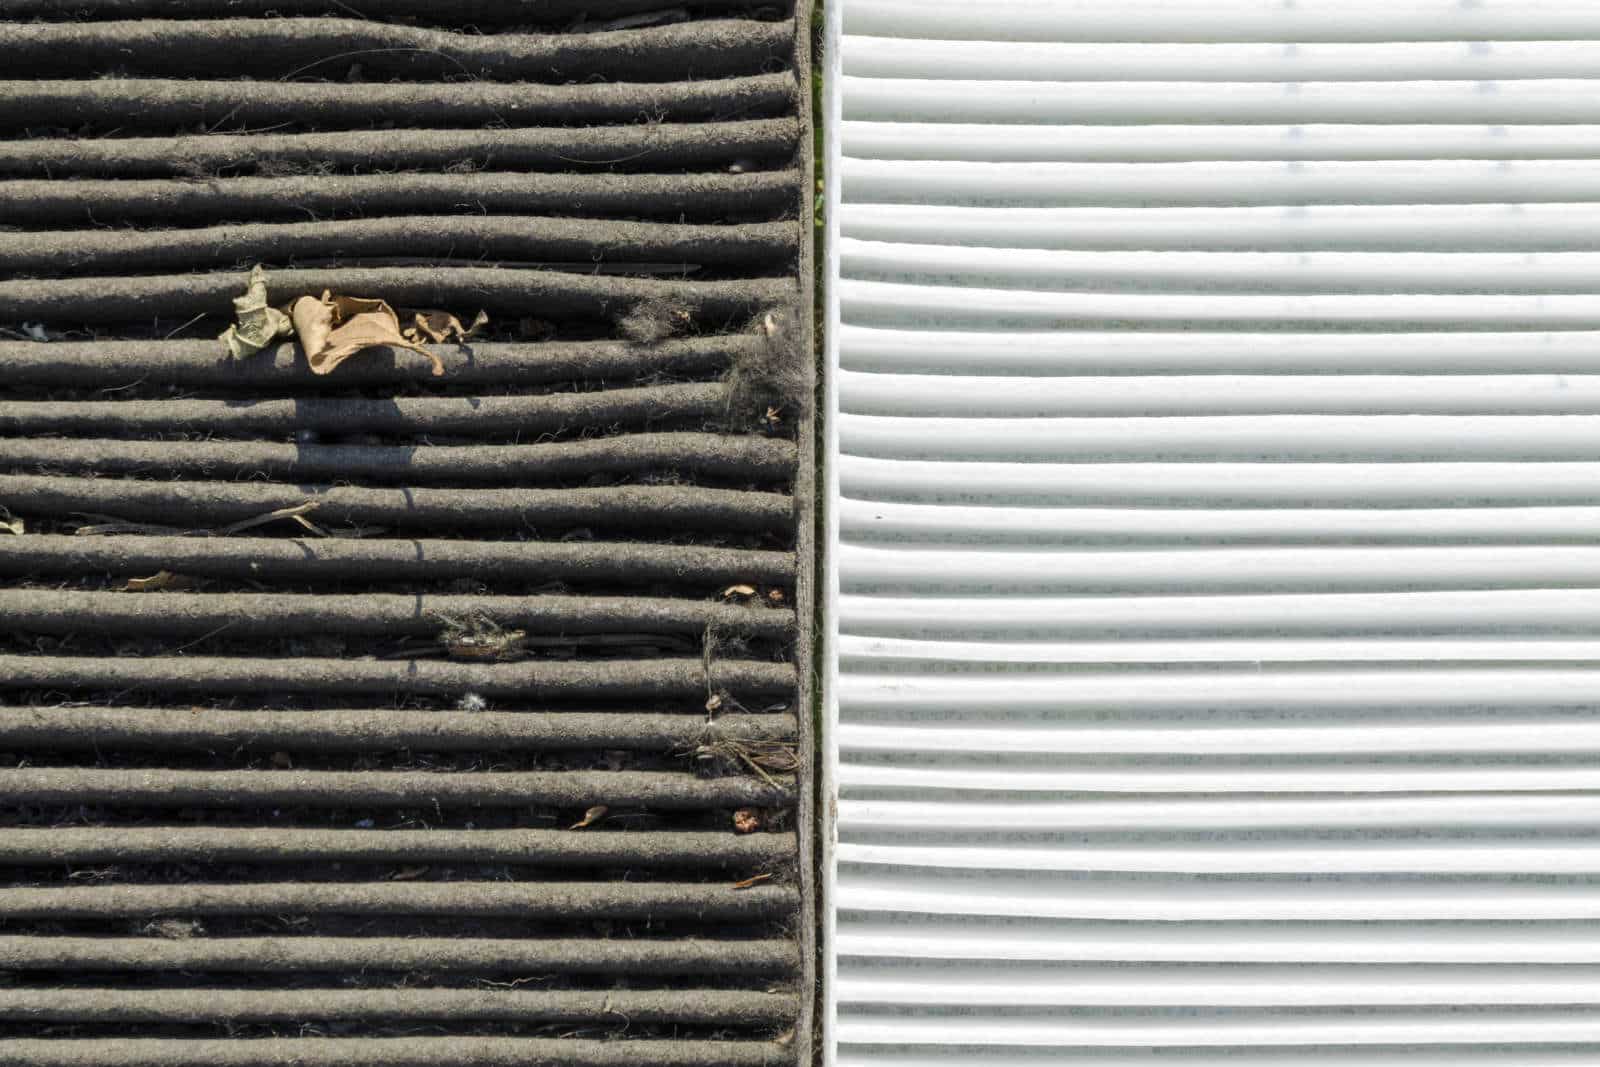 furnace is blowing cold air because the air filter is dirty